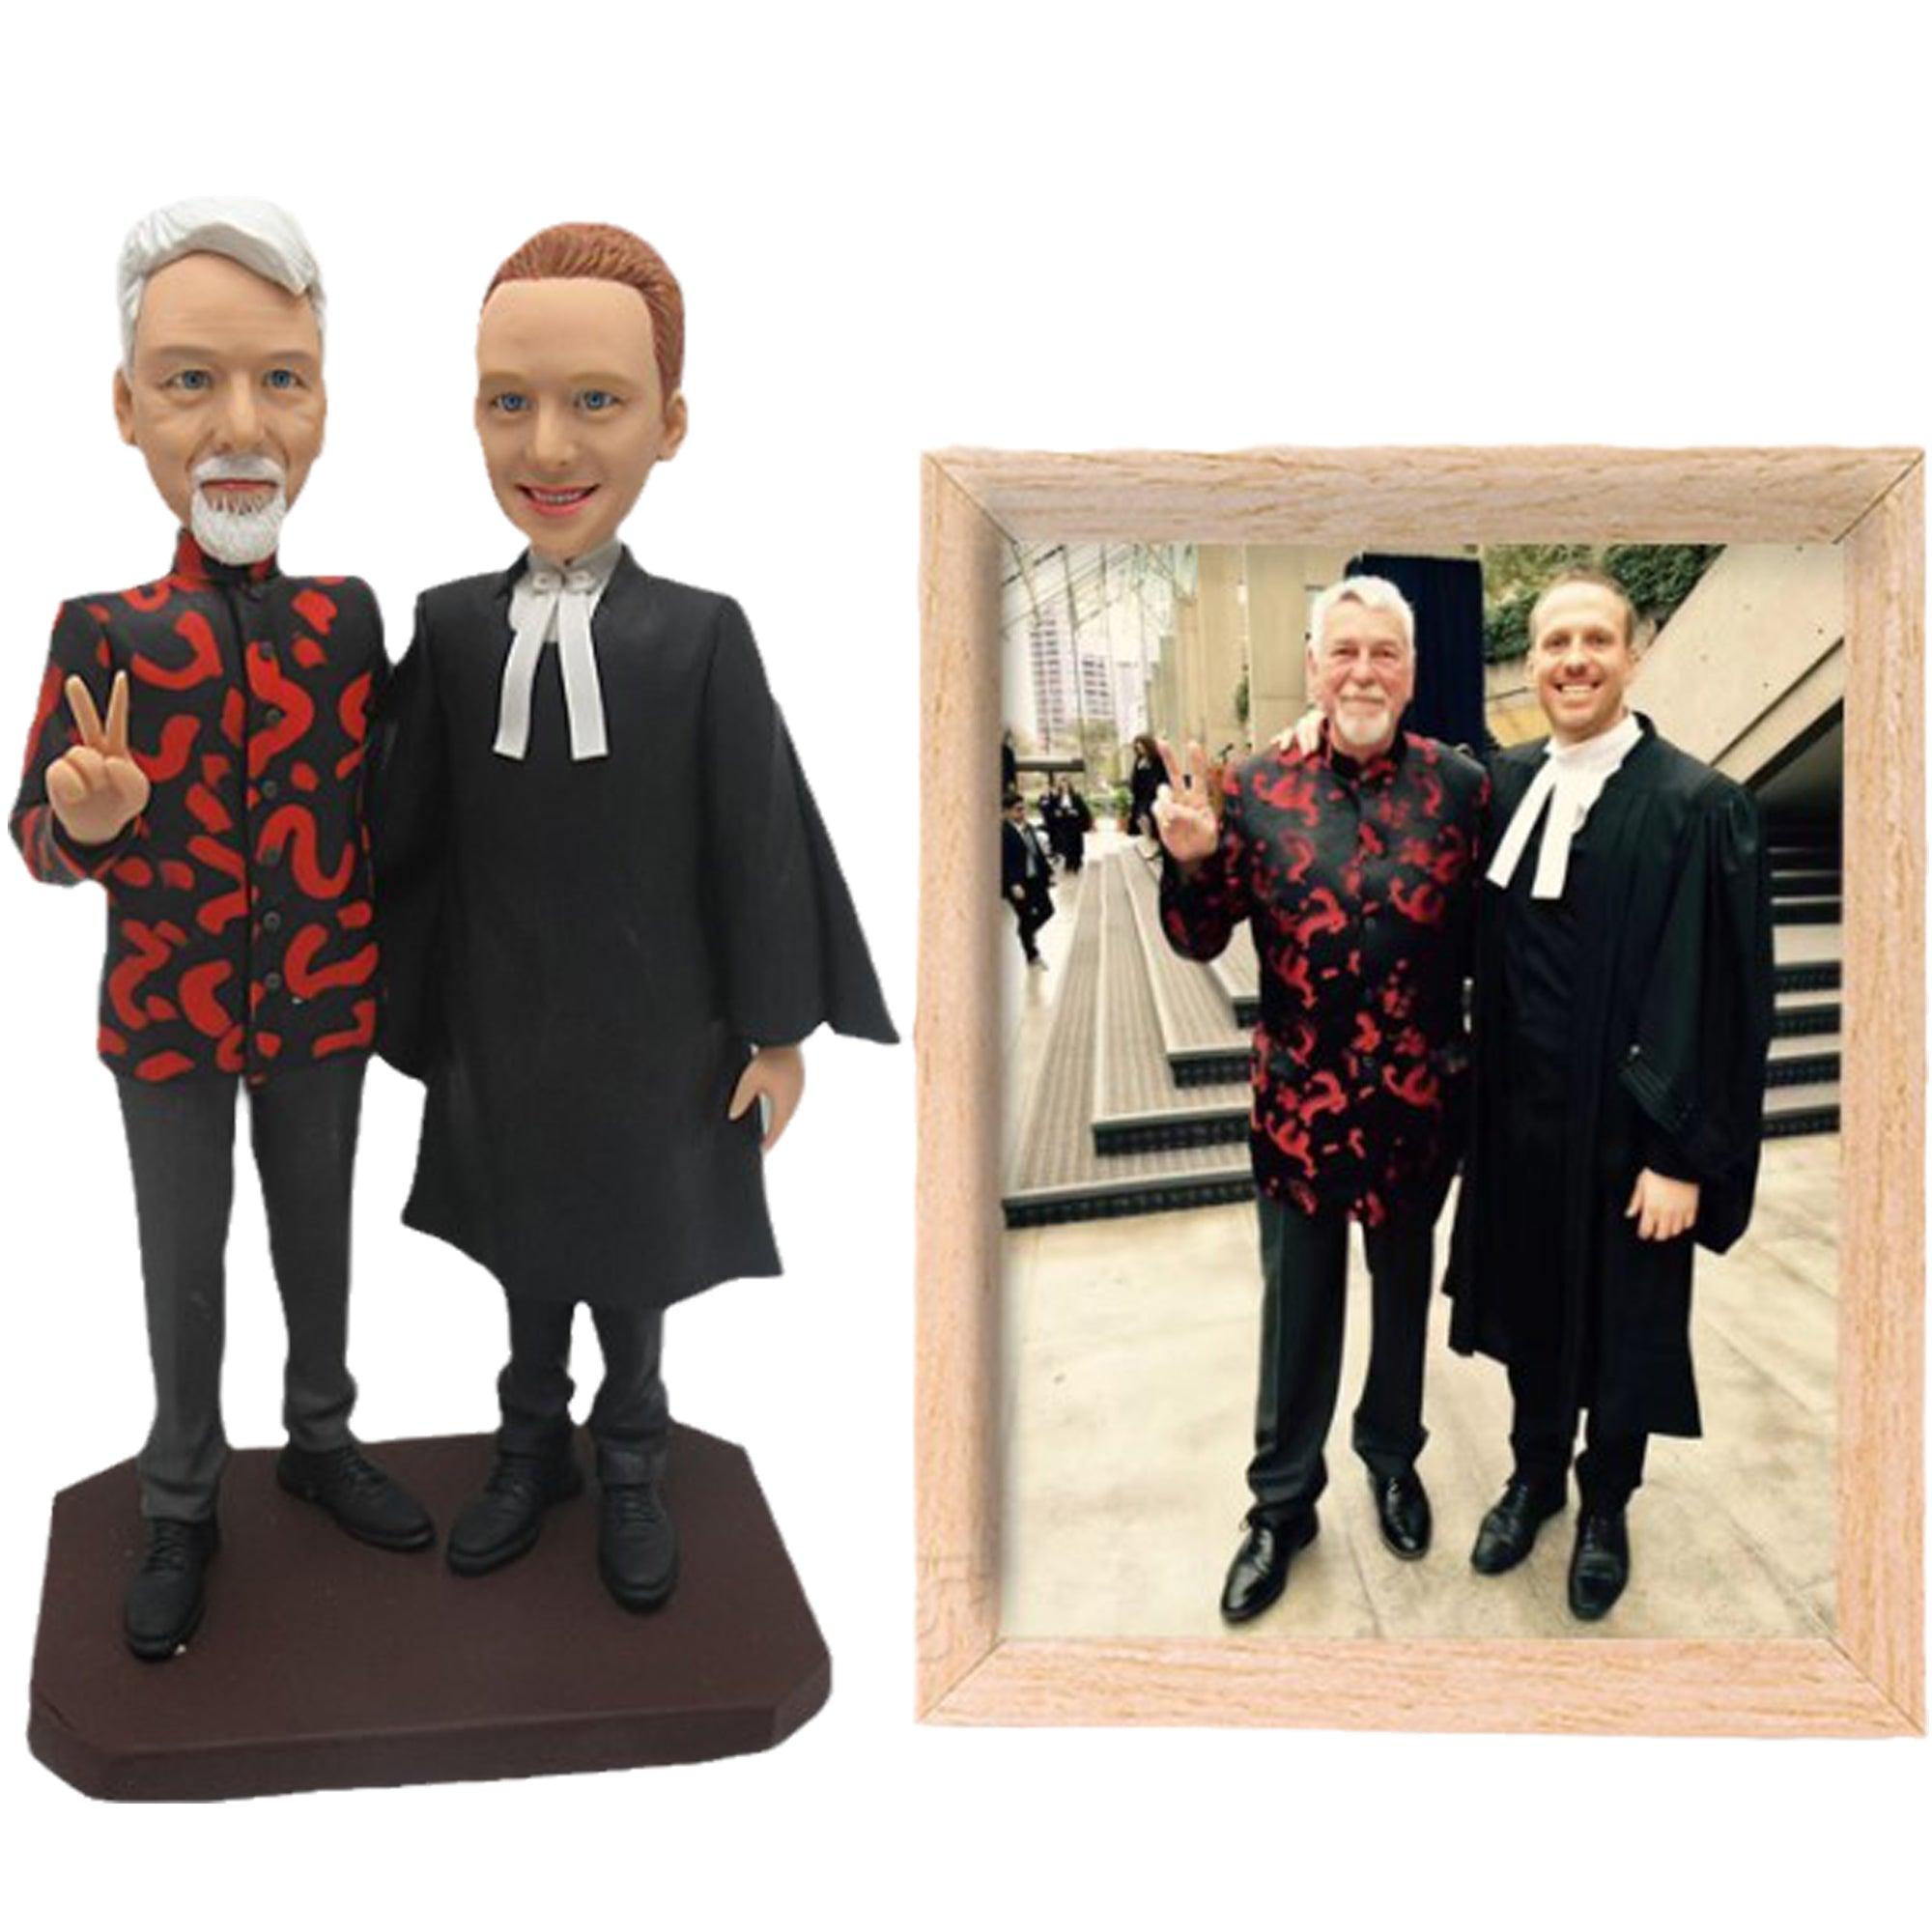 Custom Figures Personalized Figurine Customized Birthday Gifts for Boyfriend Husband Boss Office Coworker Valentines Day Gifts with Photos - CustomizeFactory